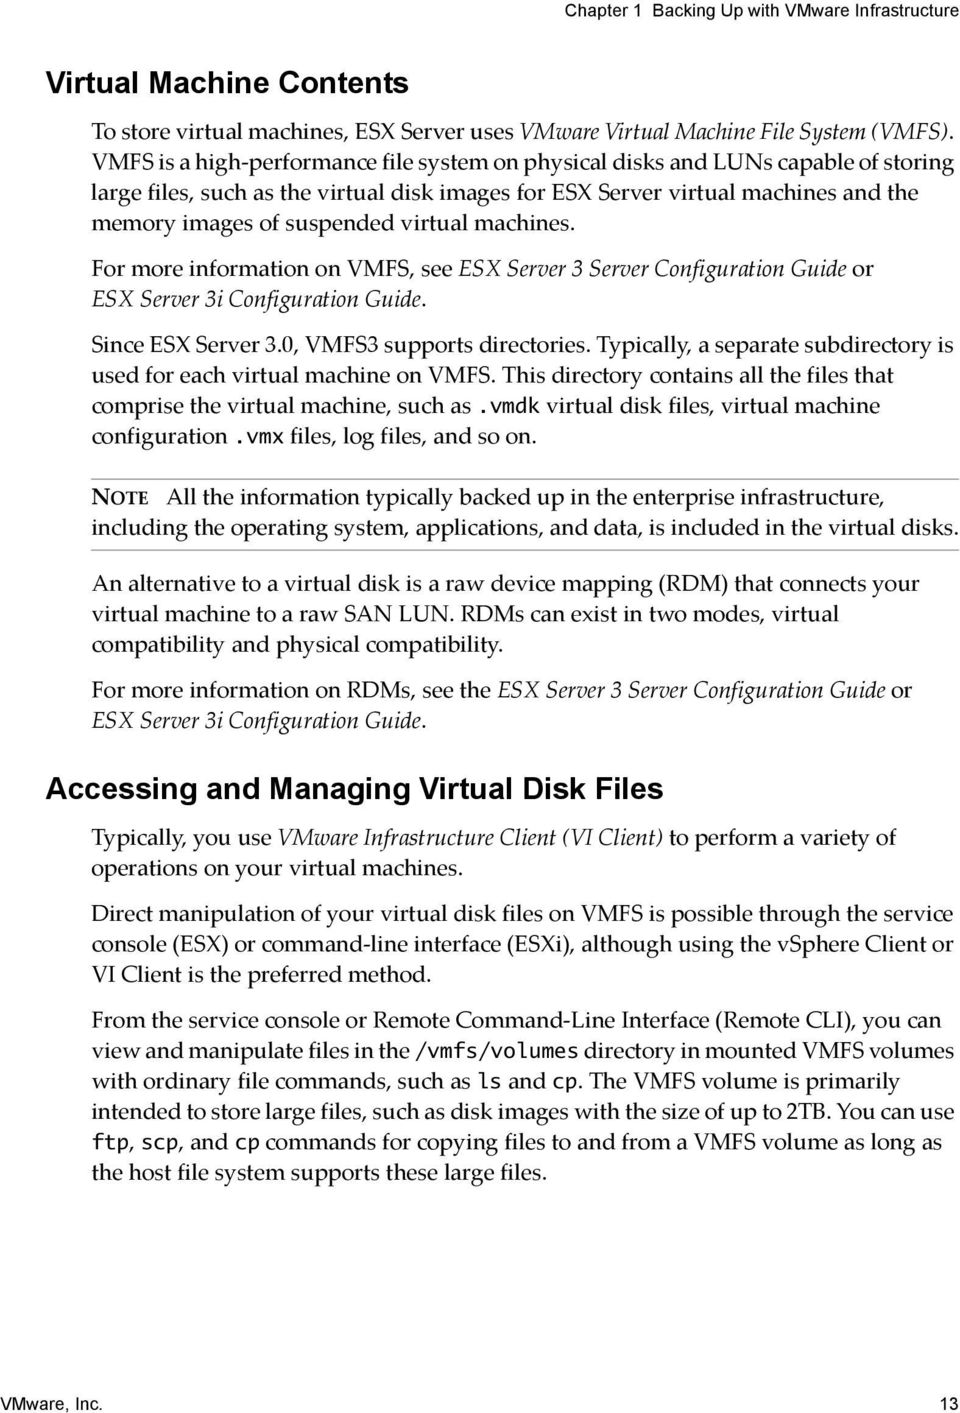 virtual machines. For more information on VMFS, see ESX Server 3 Server Configuration Guide or ESX Server 3i Configuration Guide. Since ESX Server 3.0, VMFS3 supports directories.